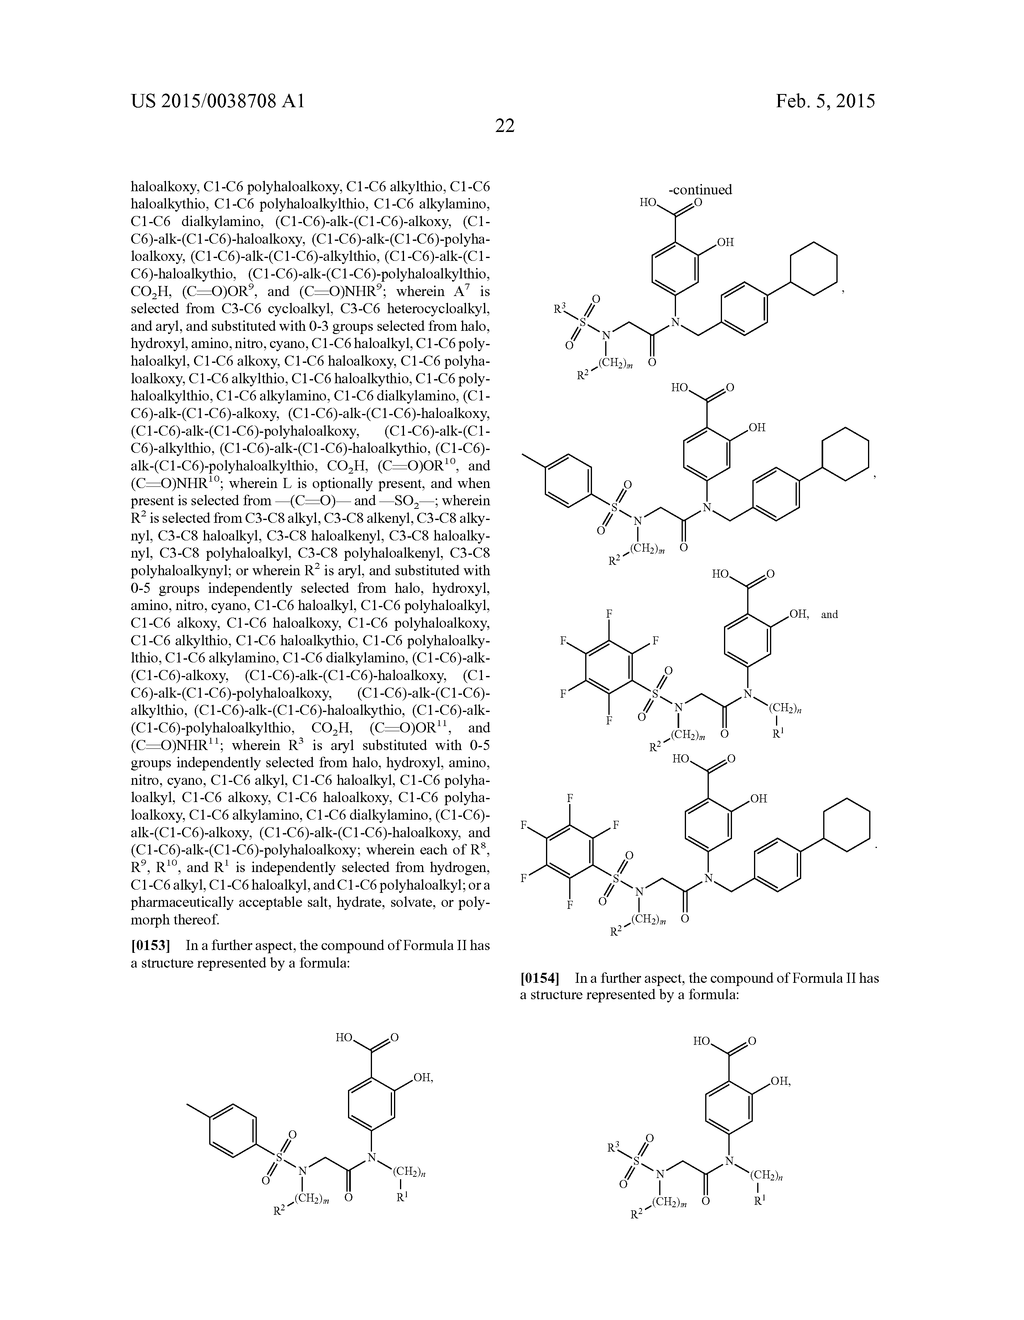 SUBSTITUTED 2-HYDROXY-4-(2-(PHENYLSULFONAMIDO)ACETAMIDO)BENZOIC ACID     ANALOGS AS INHIBITORS OF STAT PROTEIN - diagram, schematic, and image 49